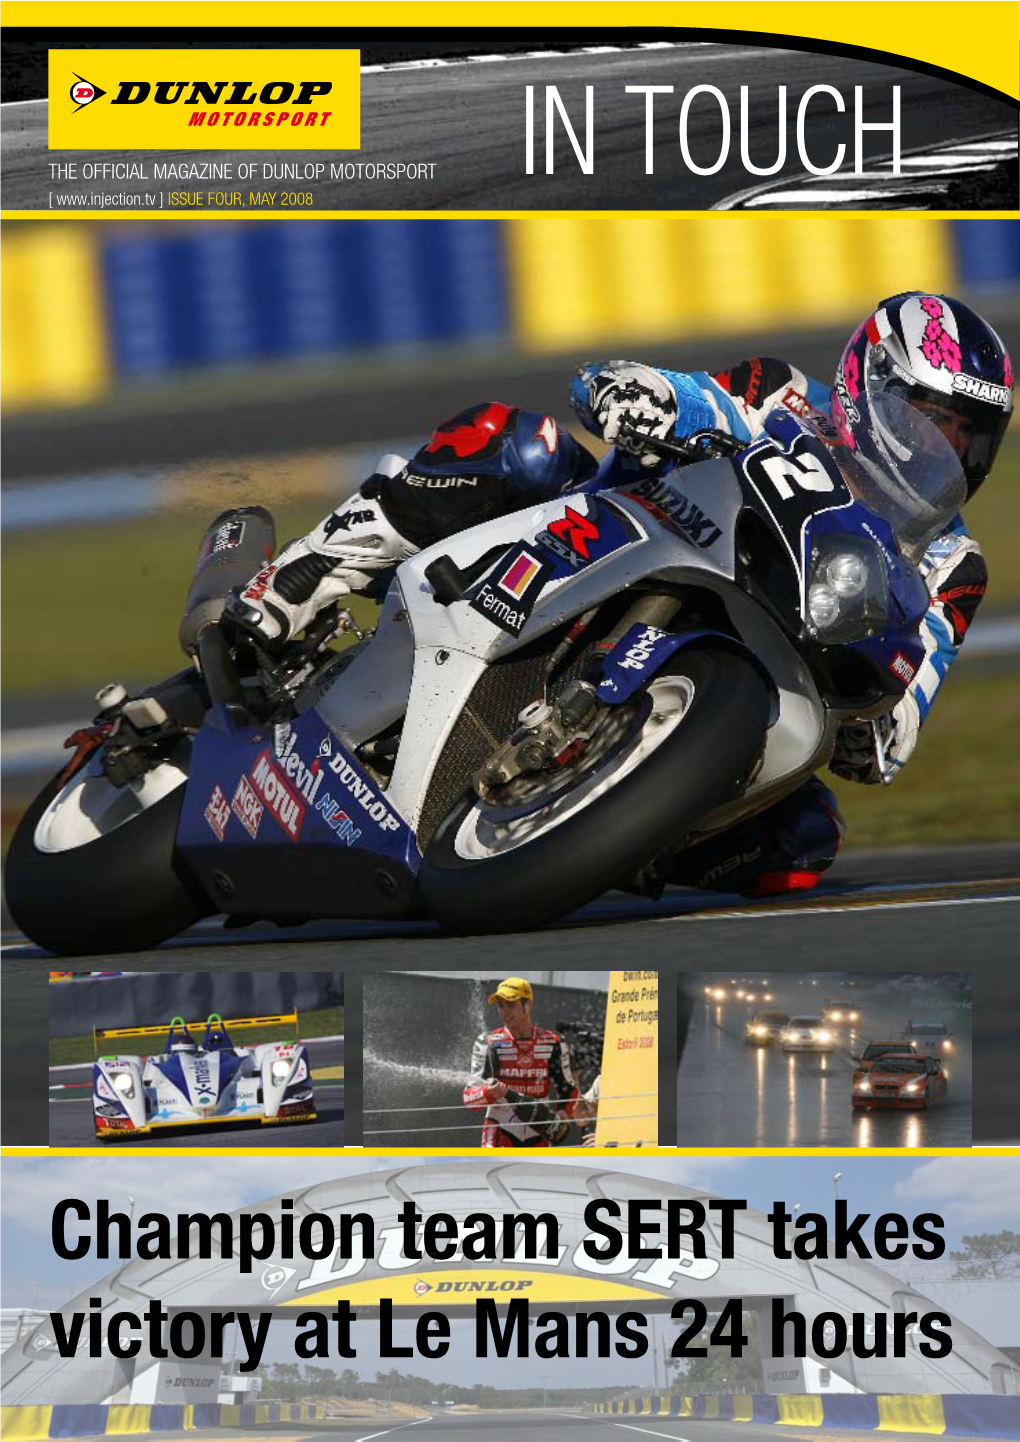 Champion Team SERT Takes Victory at Le Mans 24 Hours